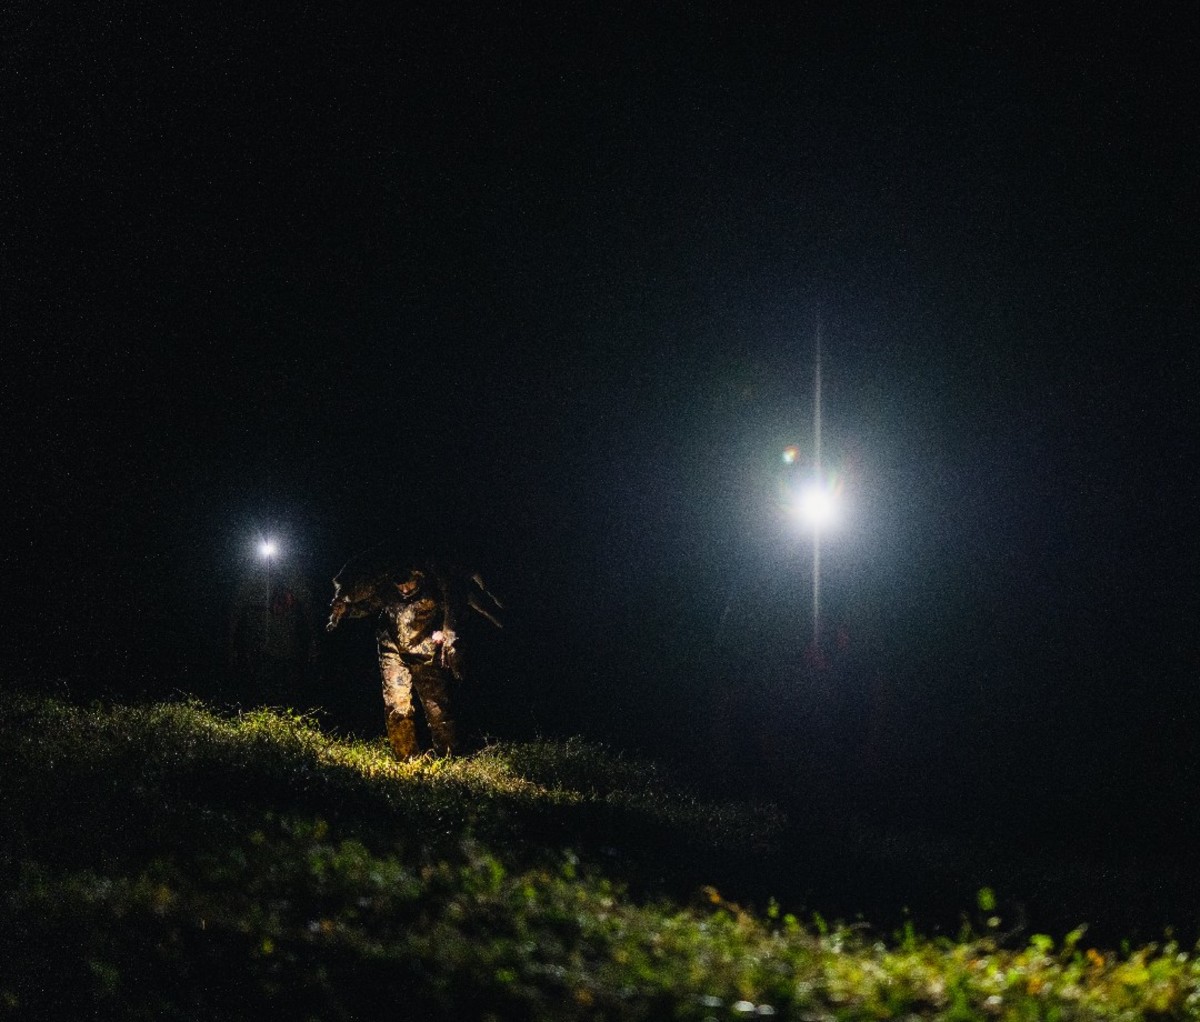 Working in the field at nighttime with bright spotlights